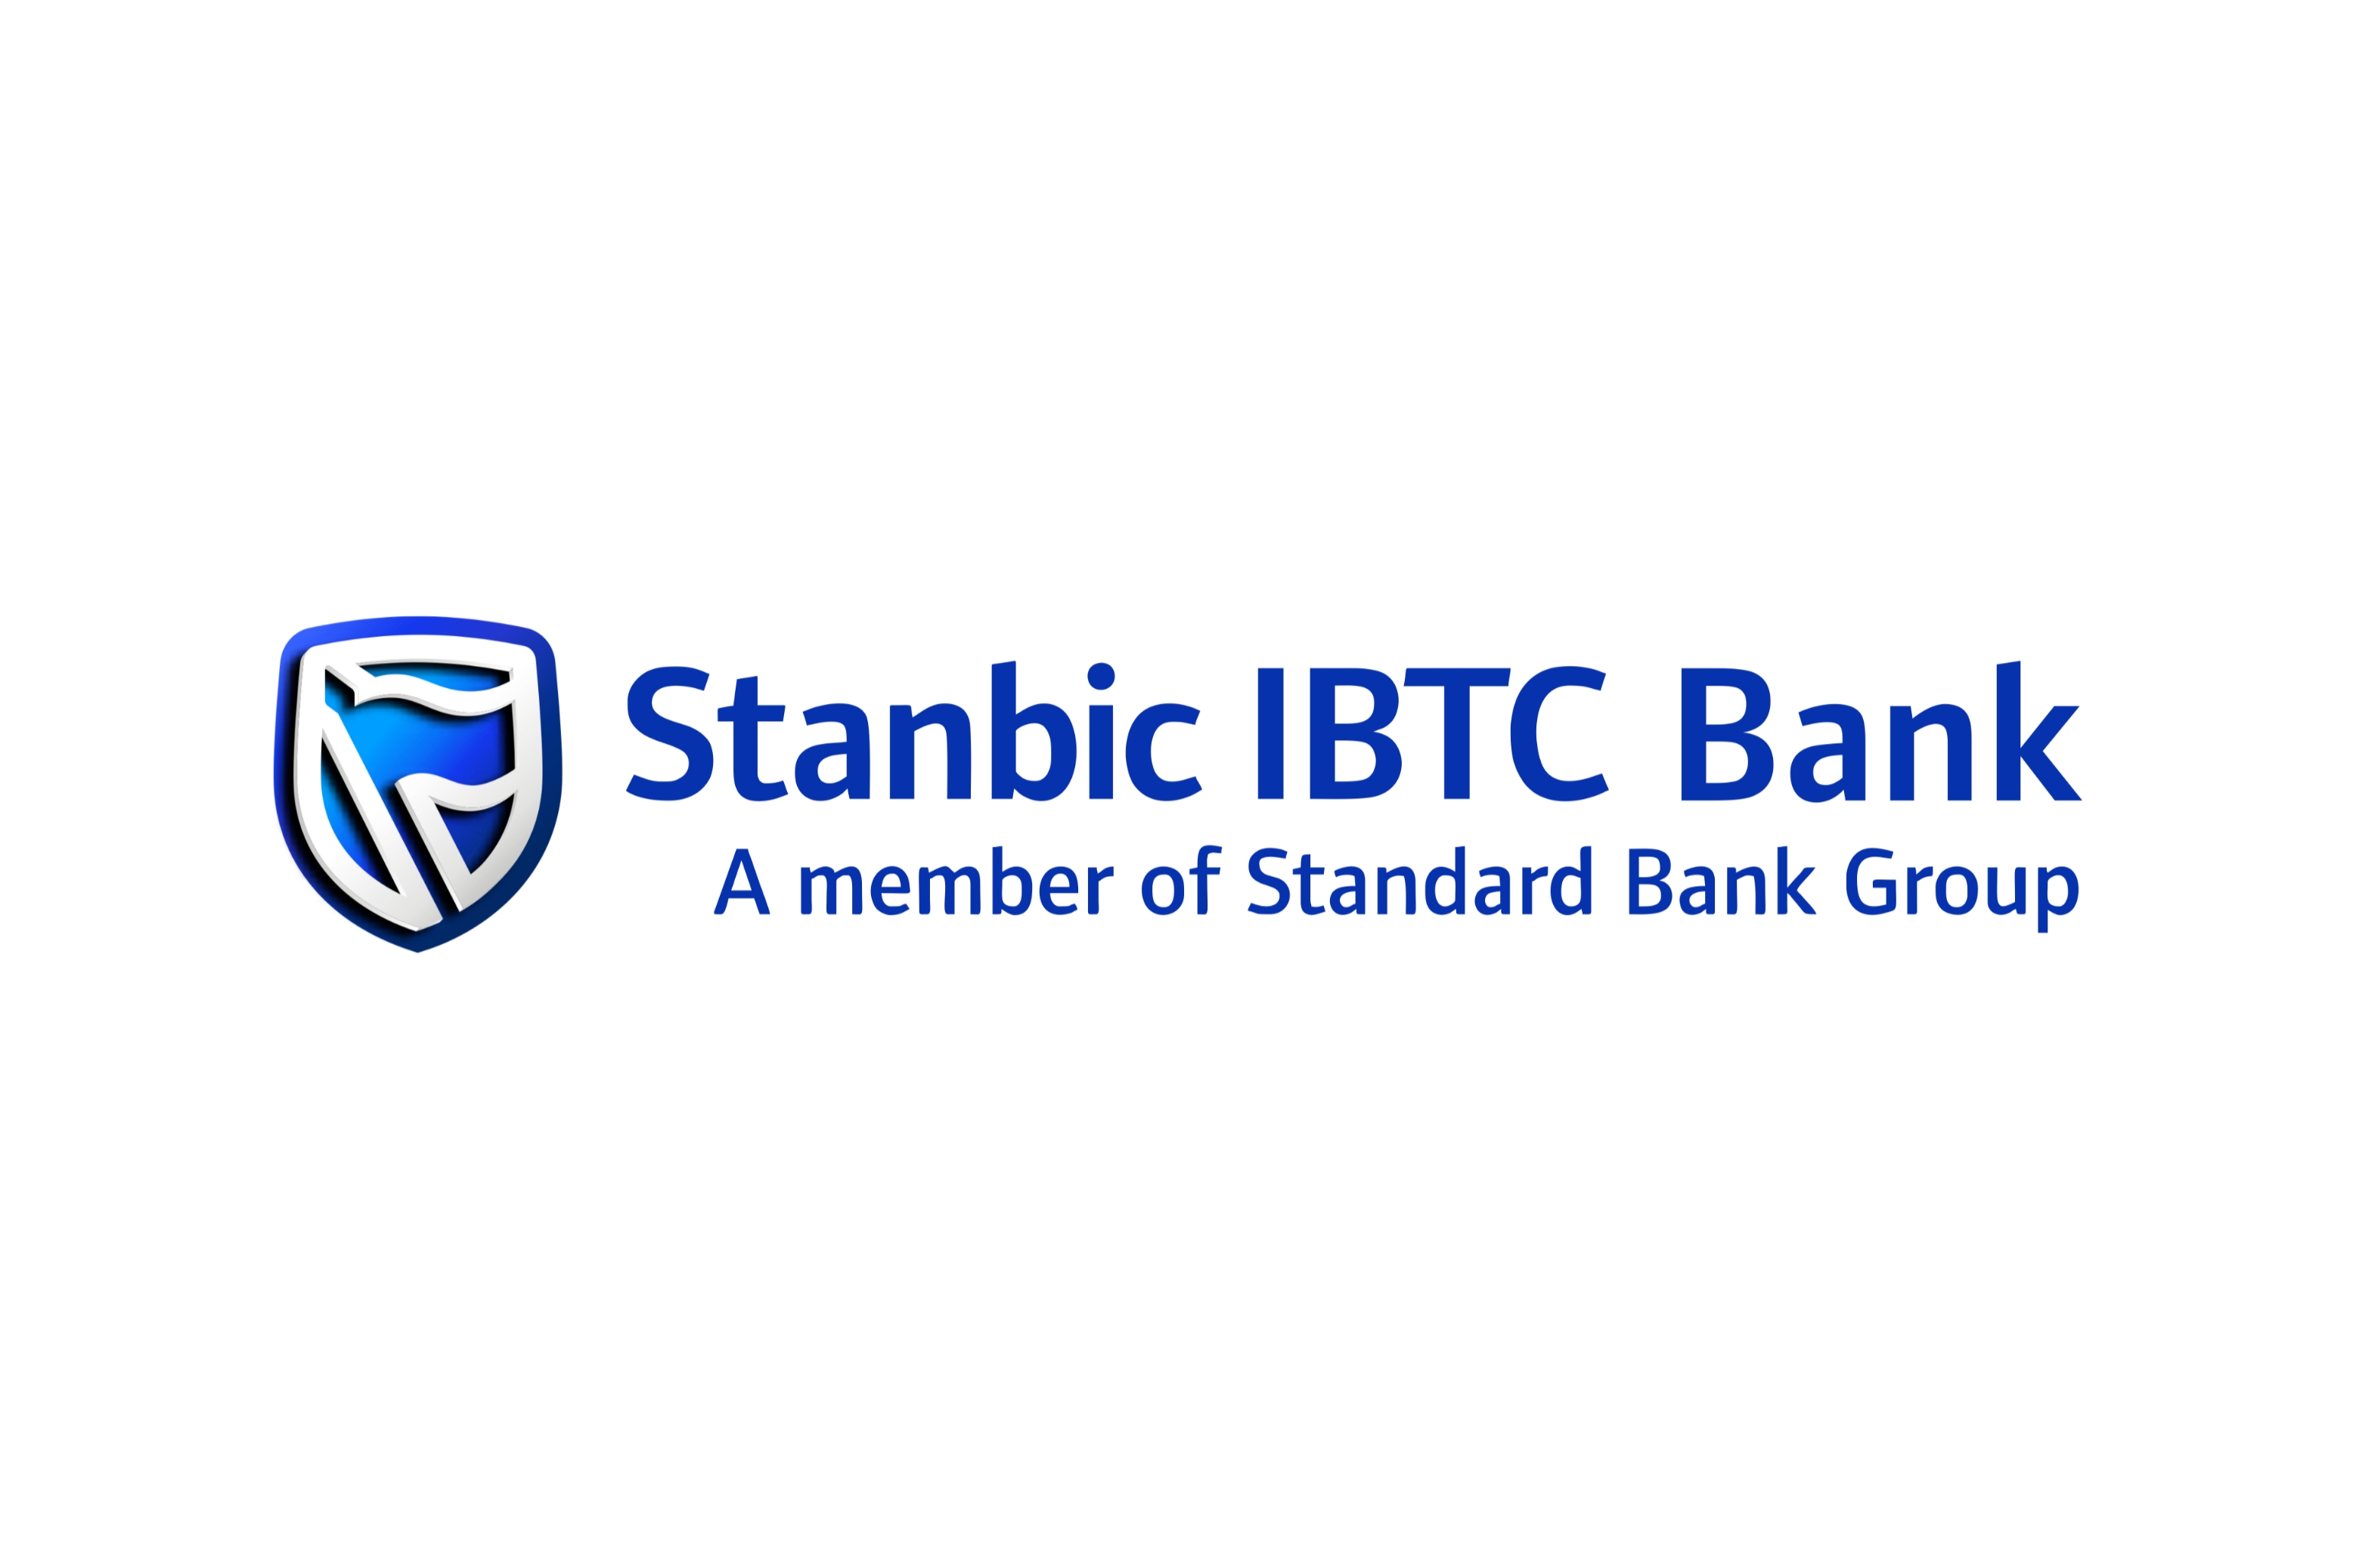 20-surprising-facts-about-stanbic-ibtc-bank